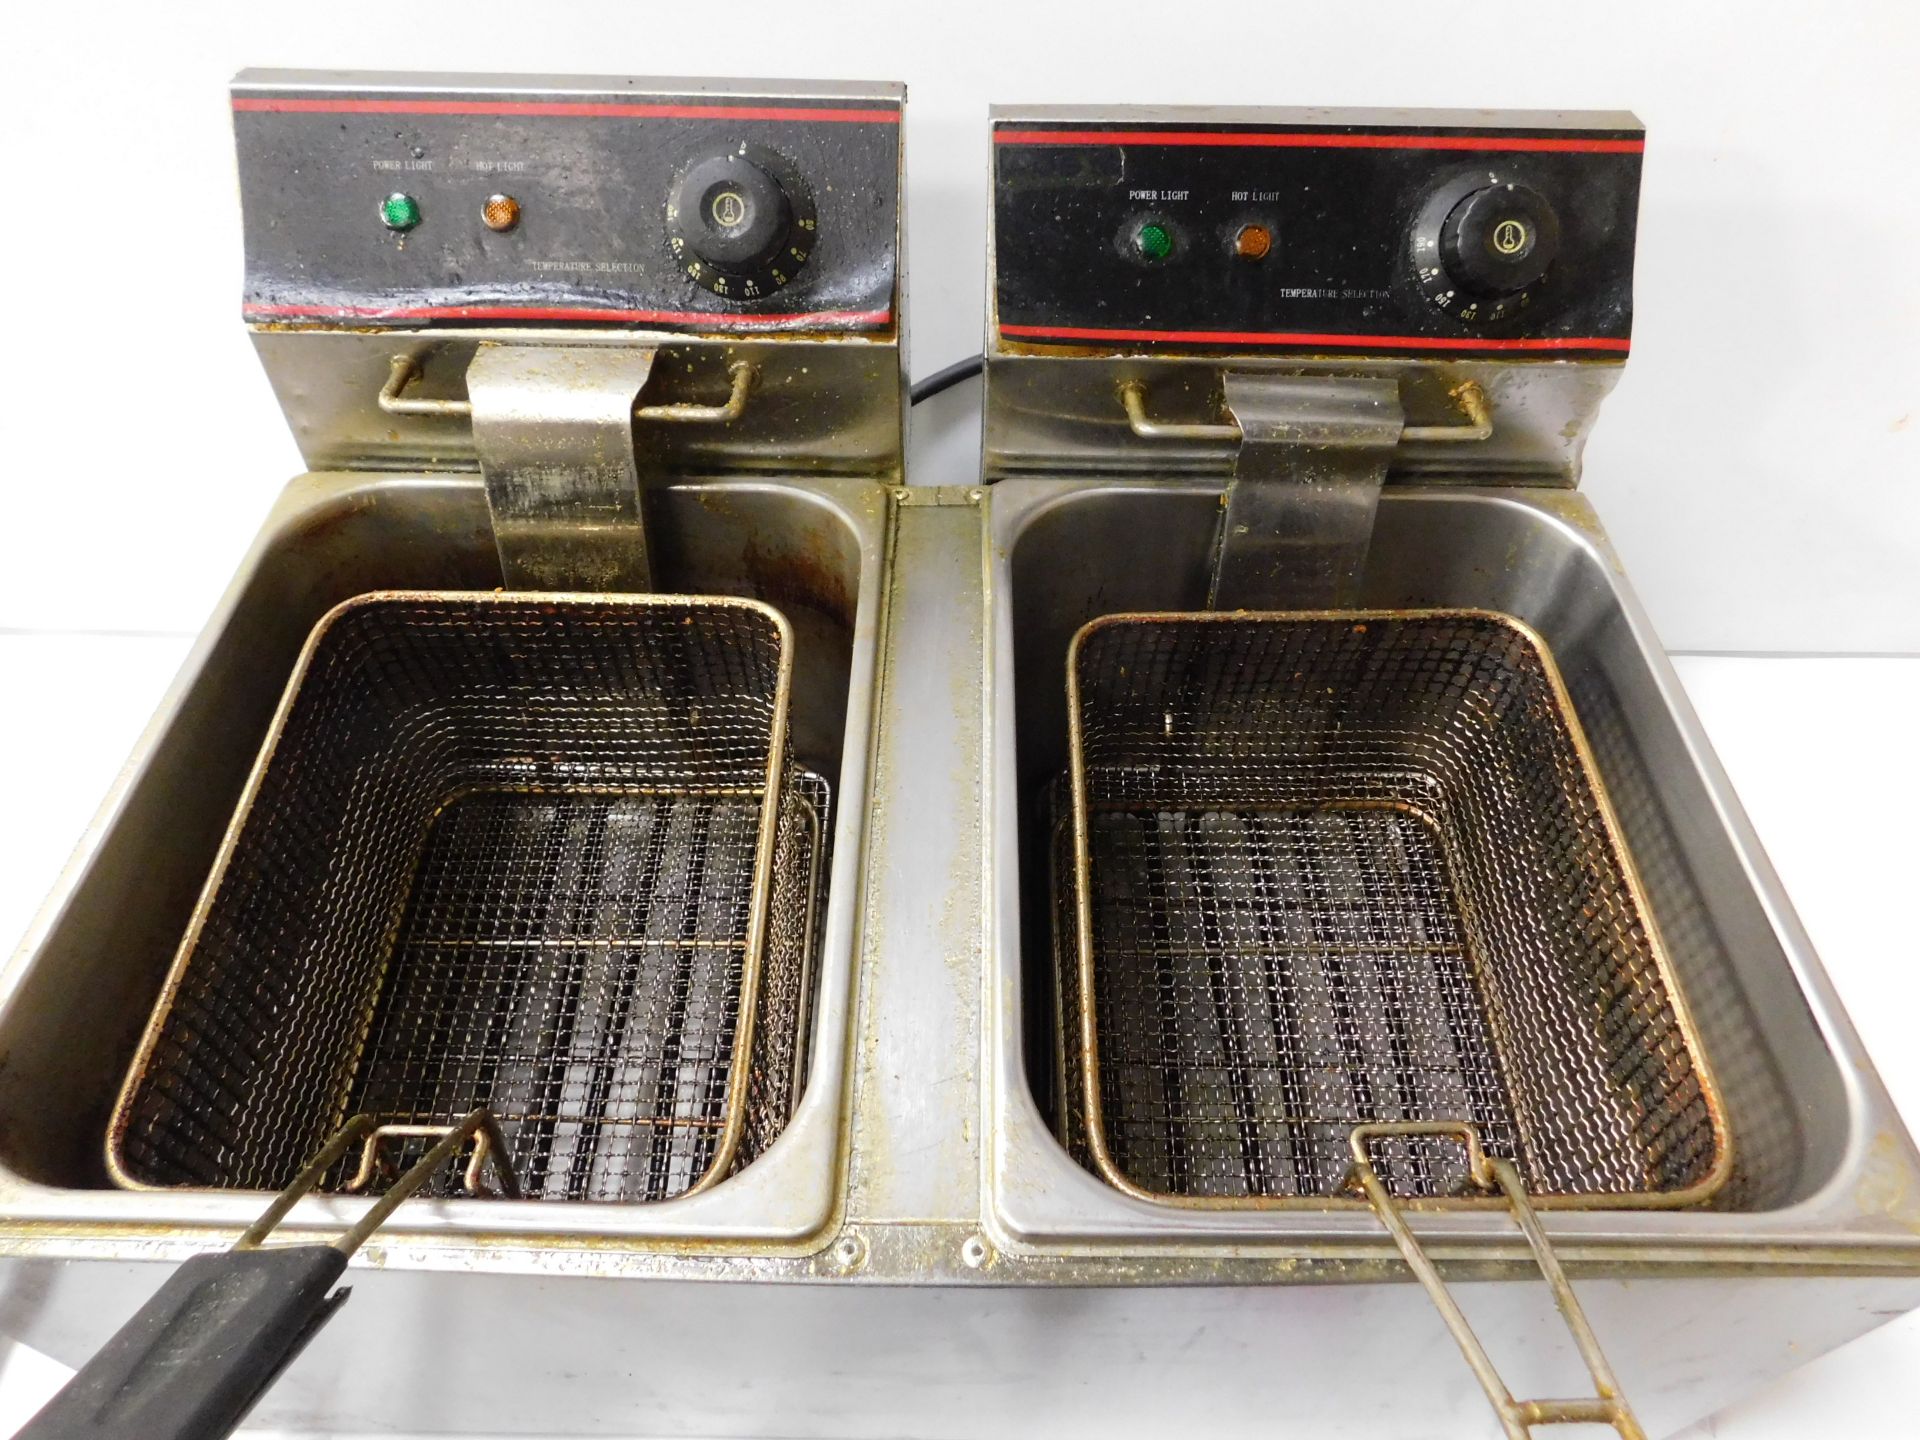 Adexa Double Deep Fryer (Location Brentwood. Please Refer to General Notes) - Image 2 of 4